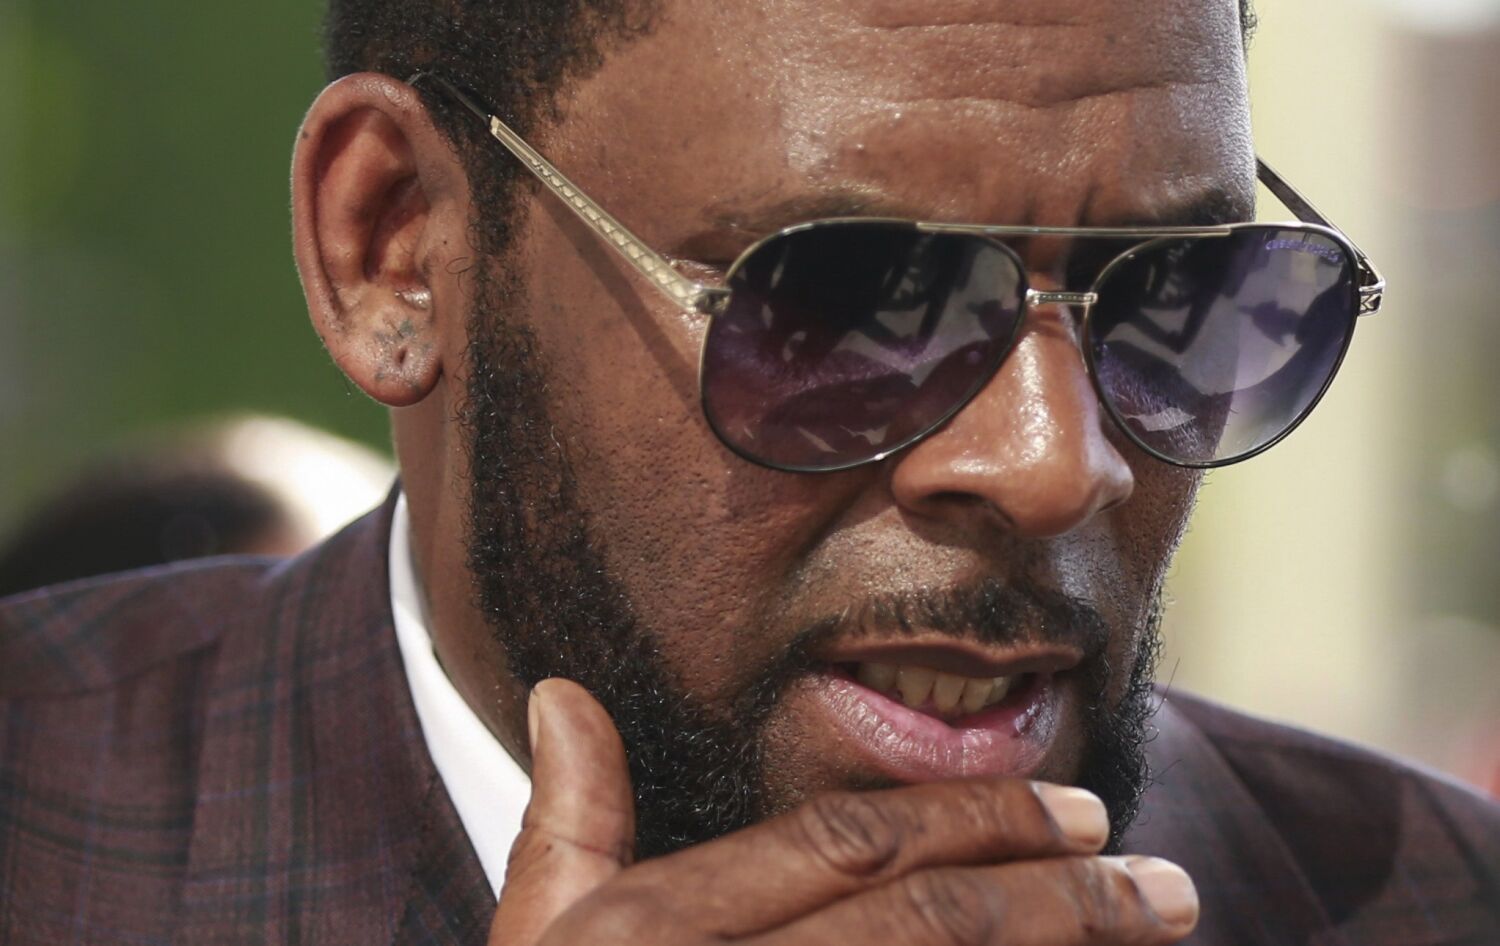 R. Kelly's team told police in February hundreds of master recordings were missing